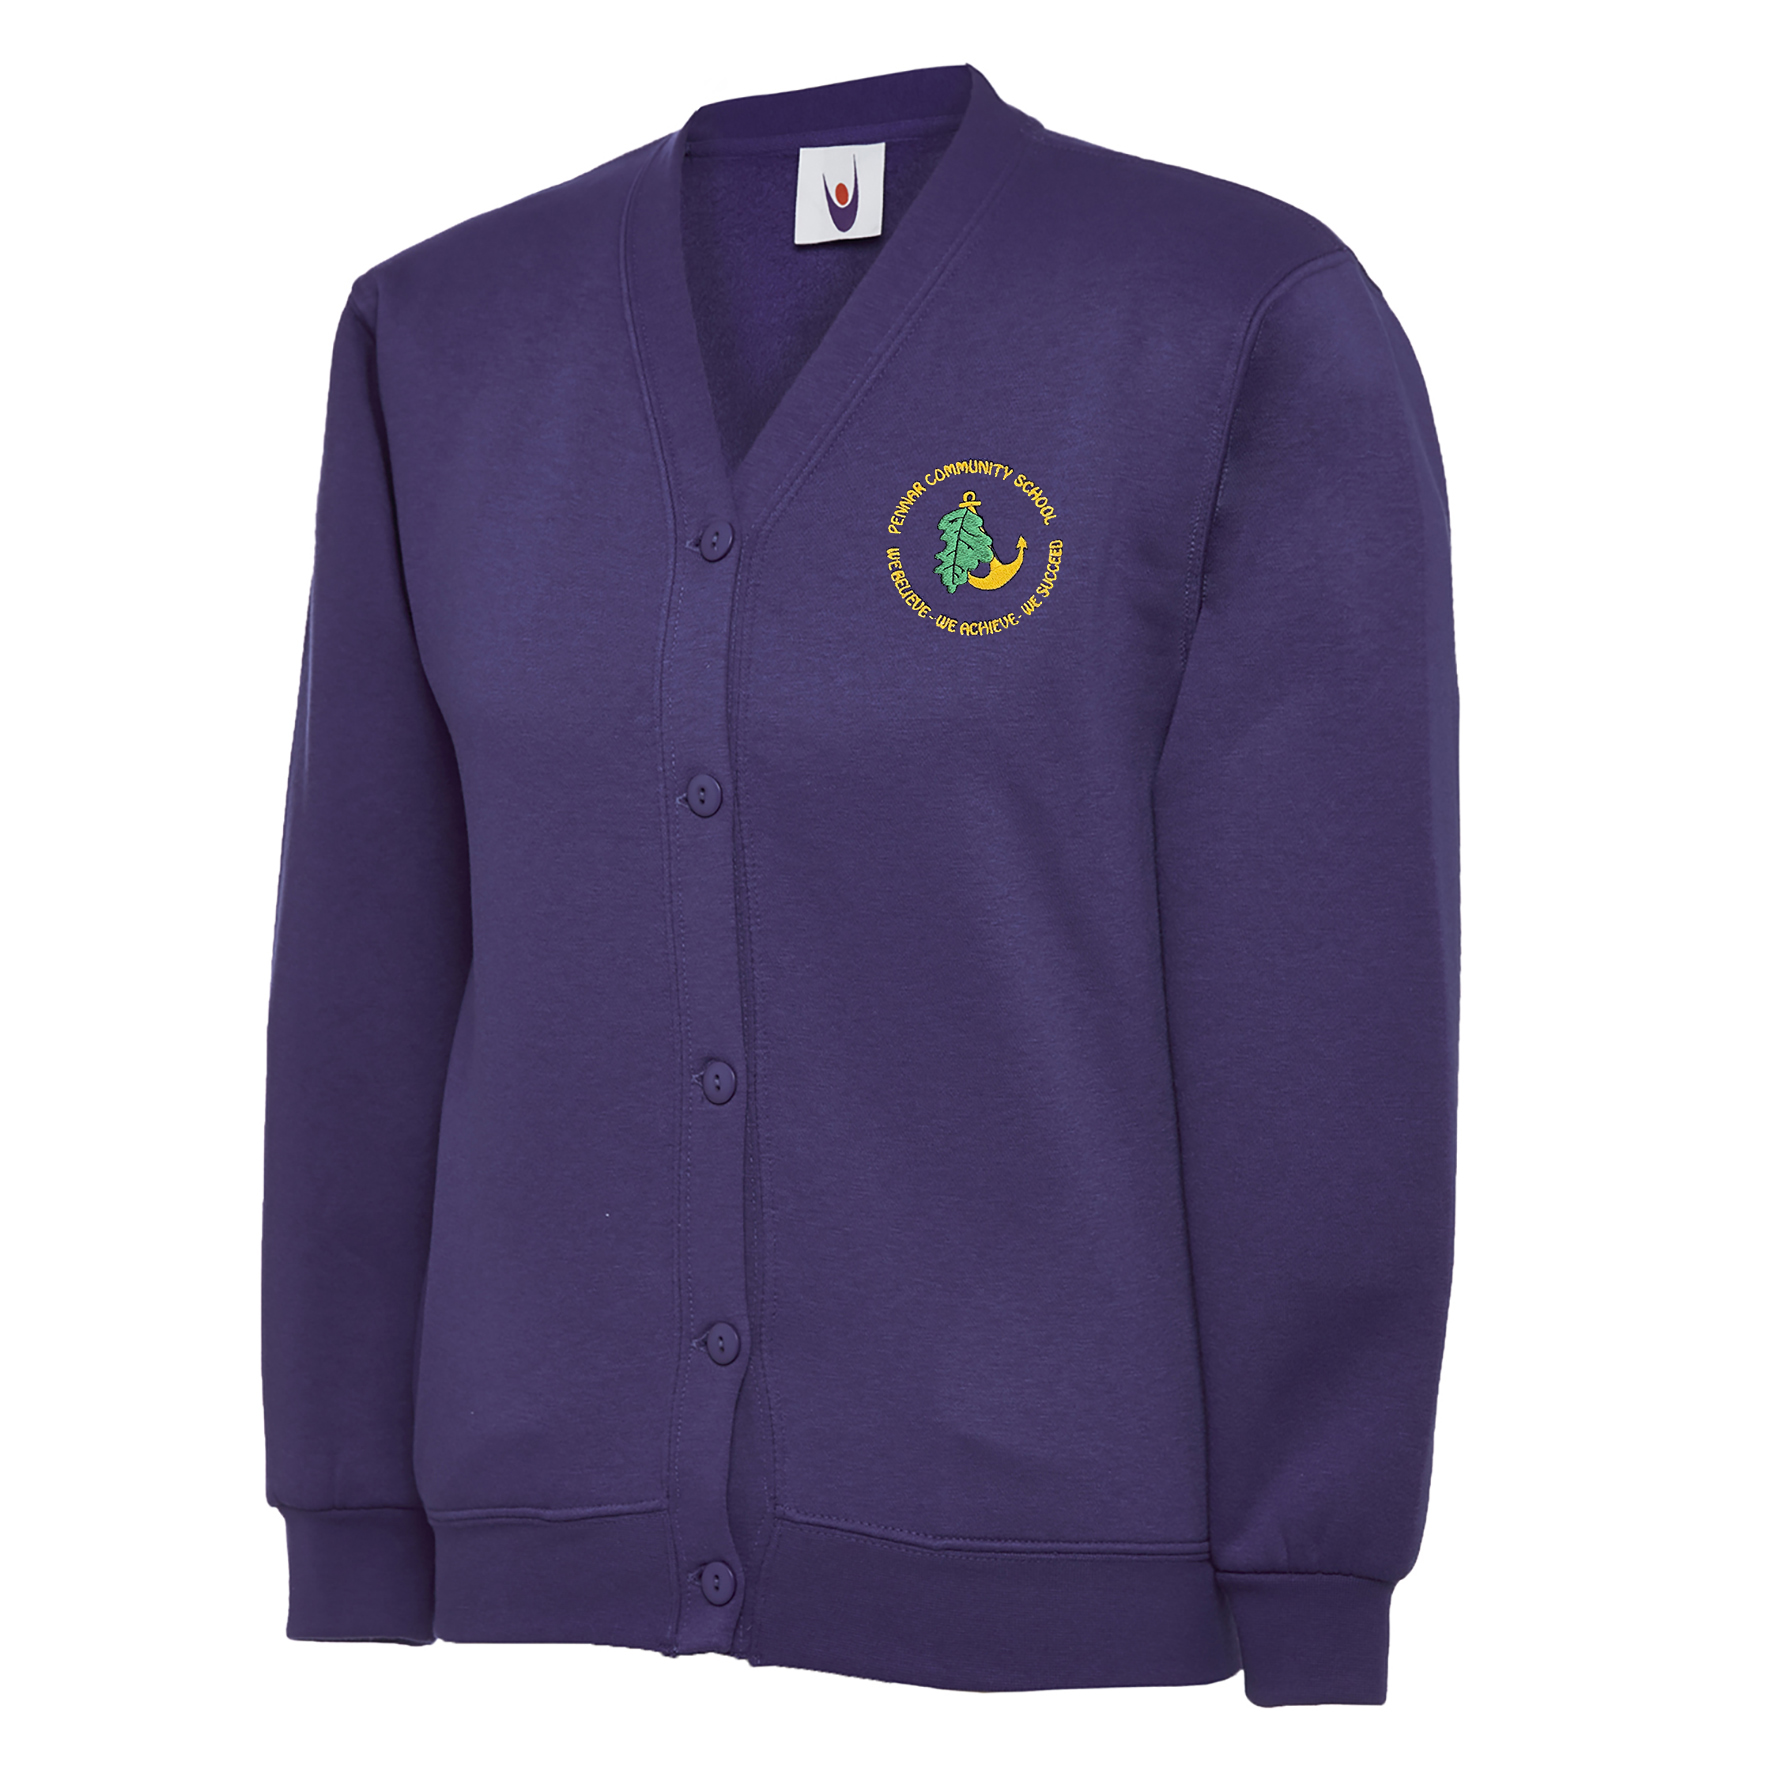 Pennar Community School Cardigan - Tees R Us Embroidery and Print